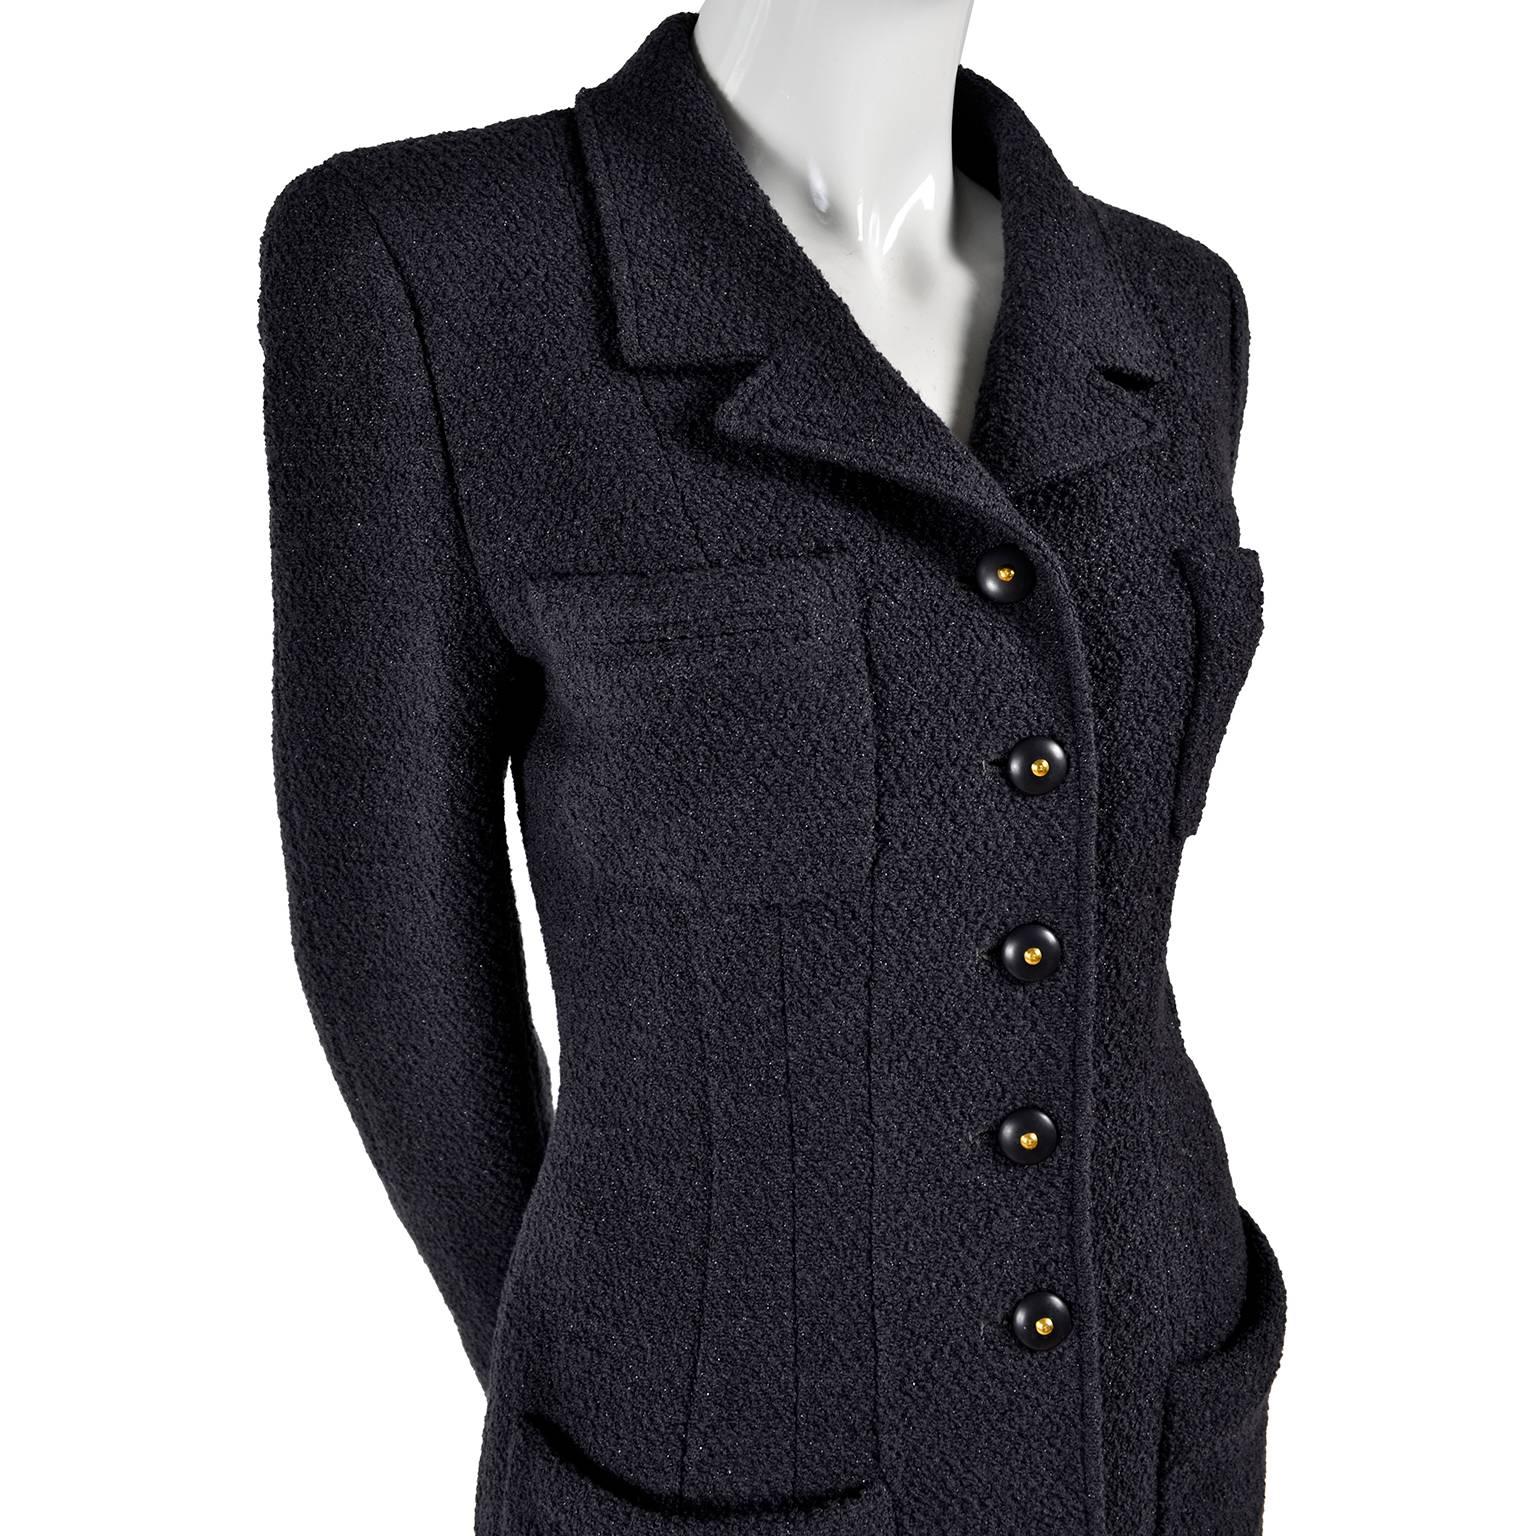 This is a stunning charcoal gray Chanel skirt suit with shimmering sparkles woven throughout the wool tweed. It has a five button jacket, with two breast pockets and two pockets at the hips, with slits in front as an added style element. The jacket